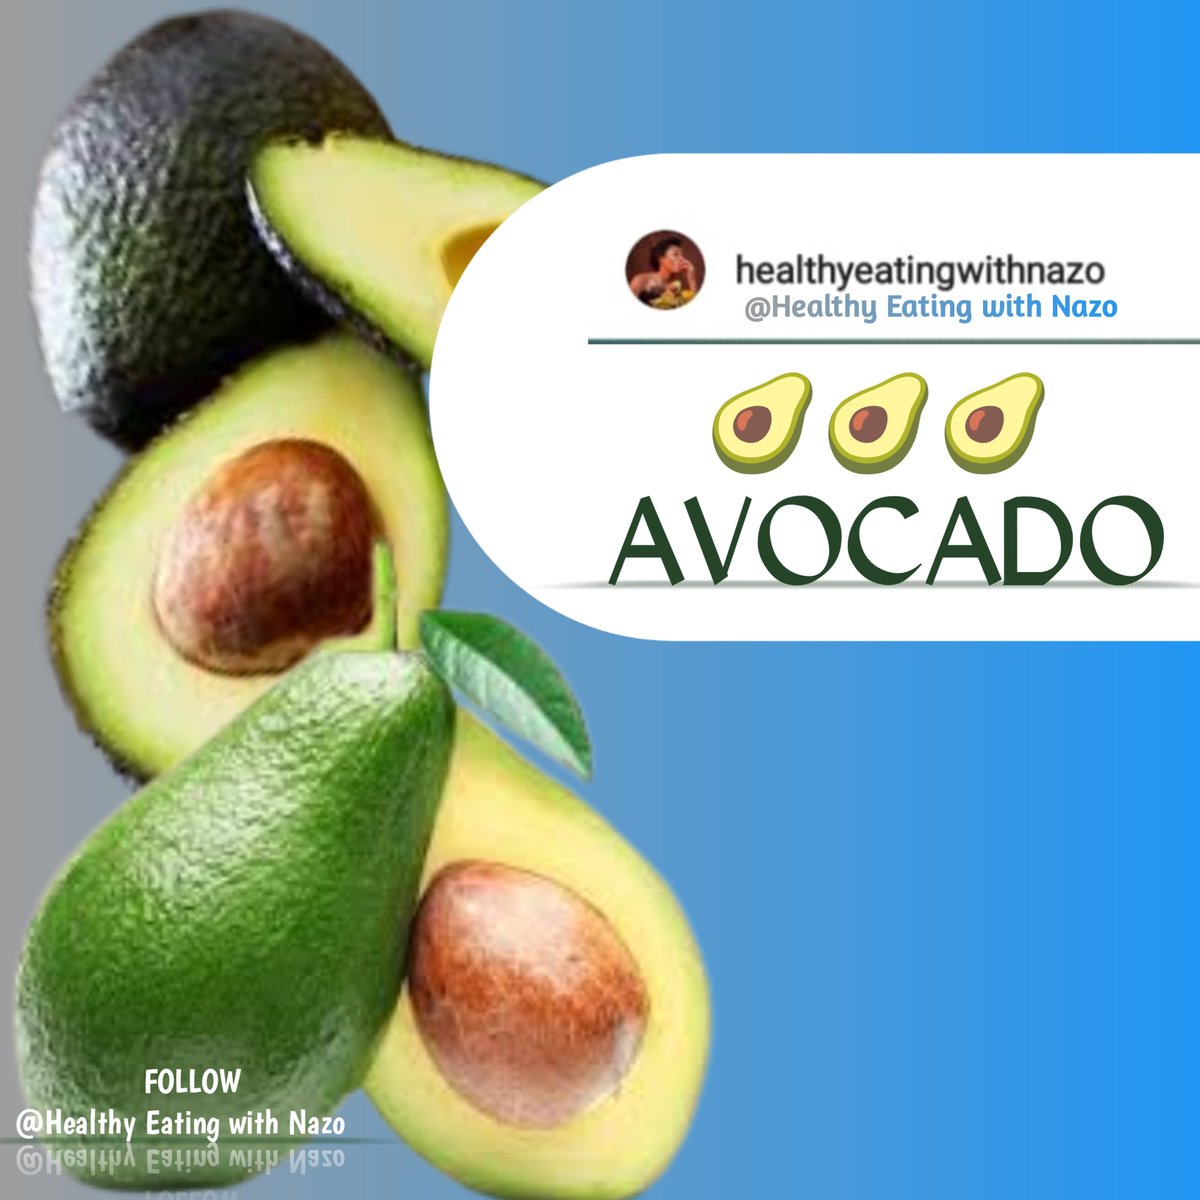 PACKED WITH NUTRIENTS:
Avocados are high in vitamins C, E, Kand B6, as well as riboflavin, niacin, folate, pantothenic acid, magnesium, and potassium. Lutein, beta carotene, and omega-3 fatty acids which are essential for our health.